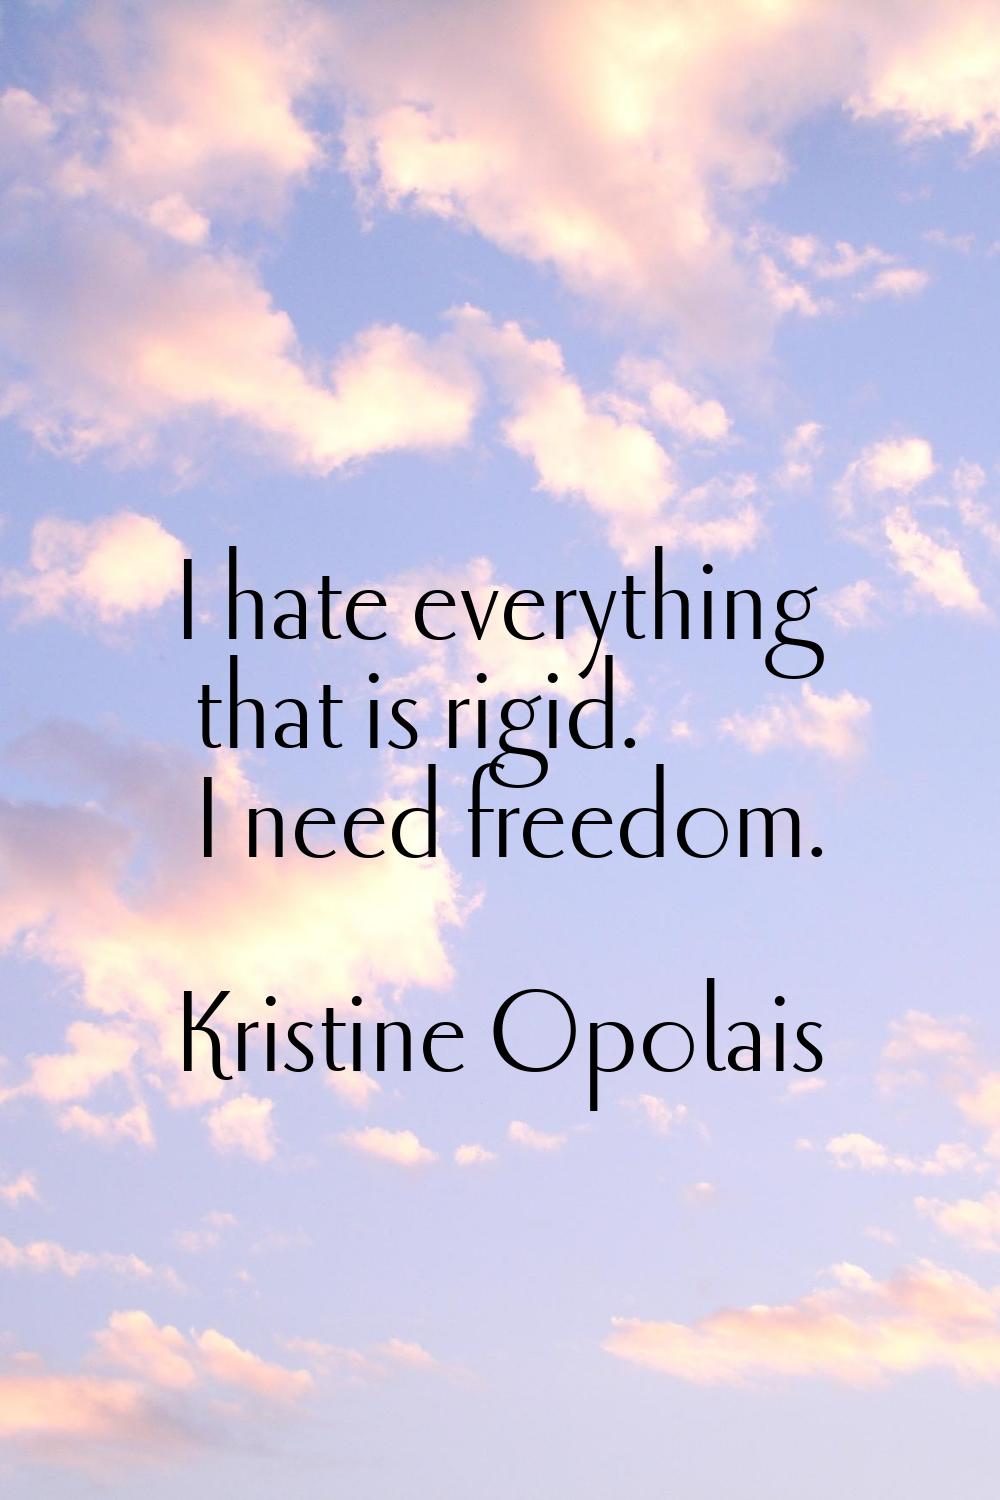 I hate everything that is rigid. I need freedom.